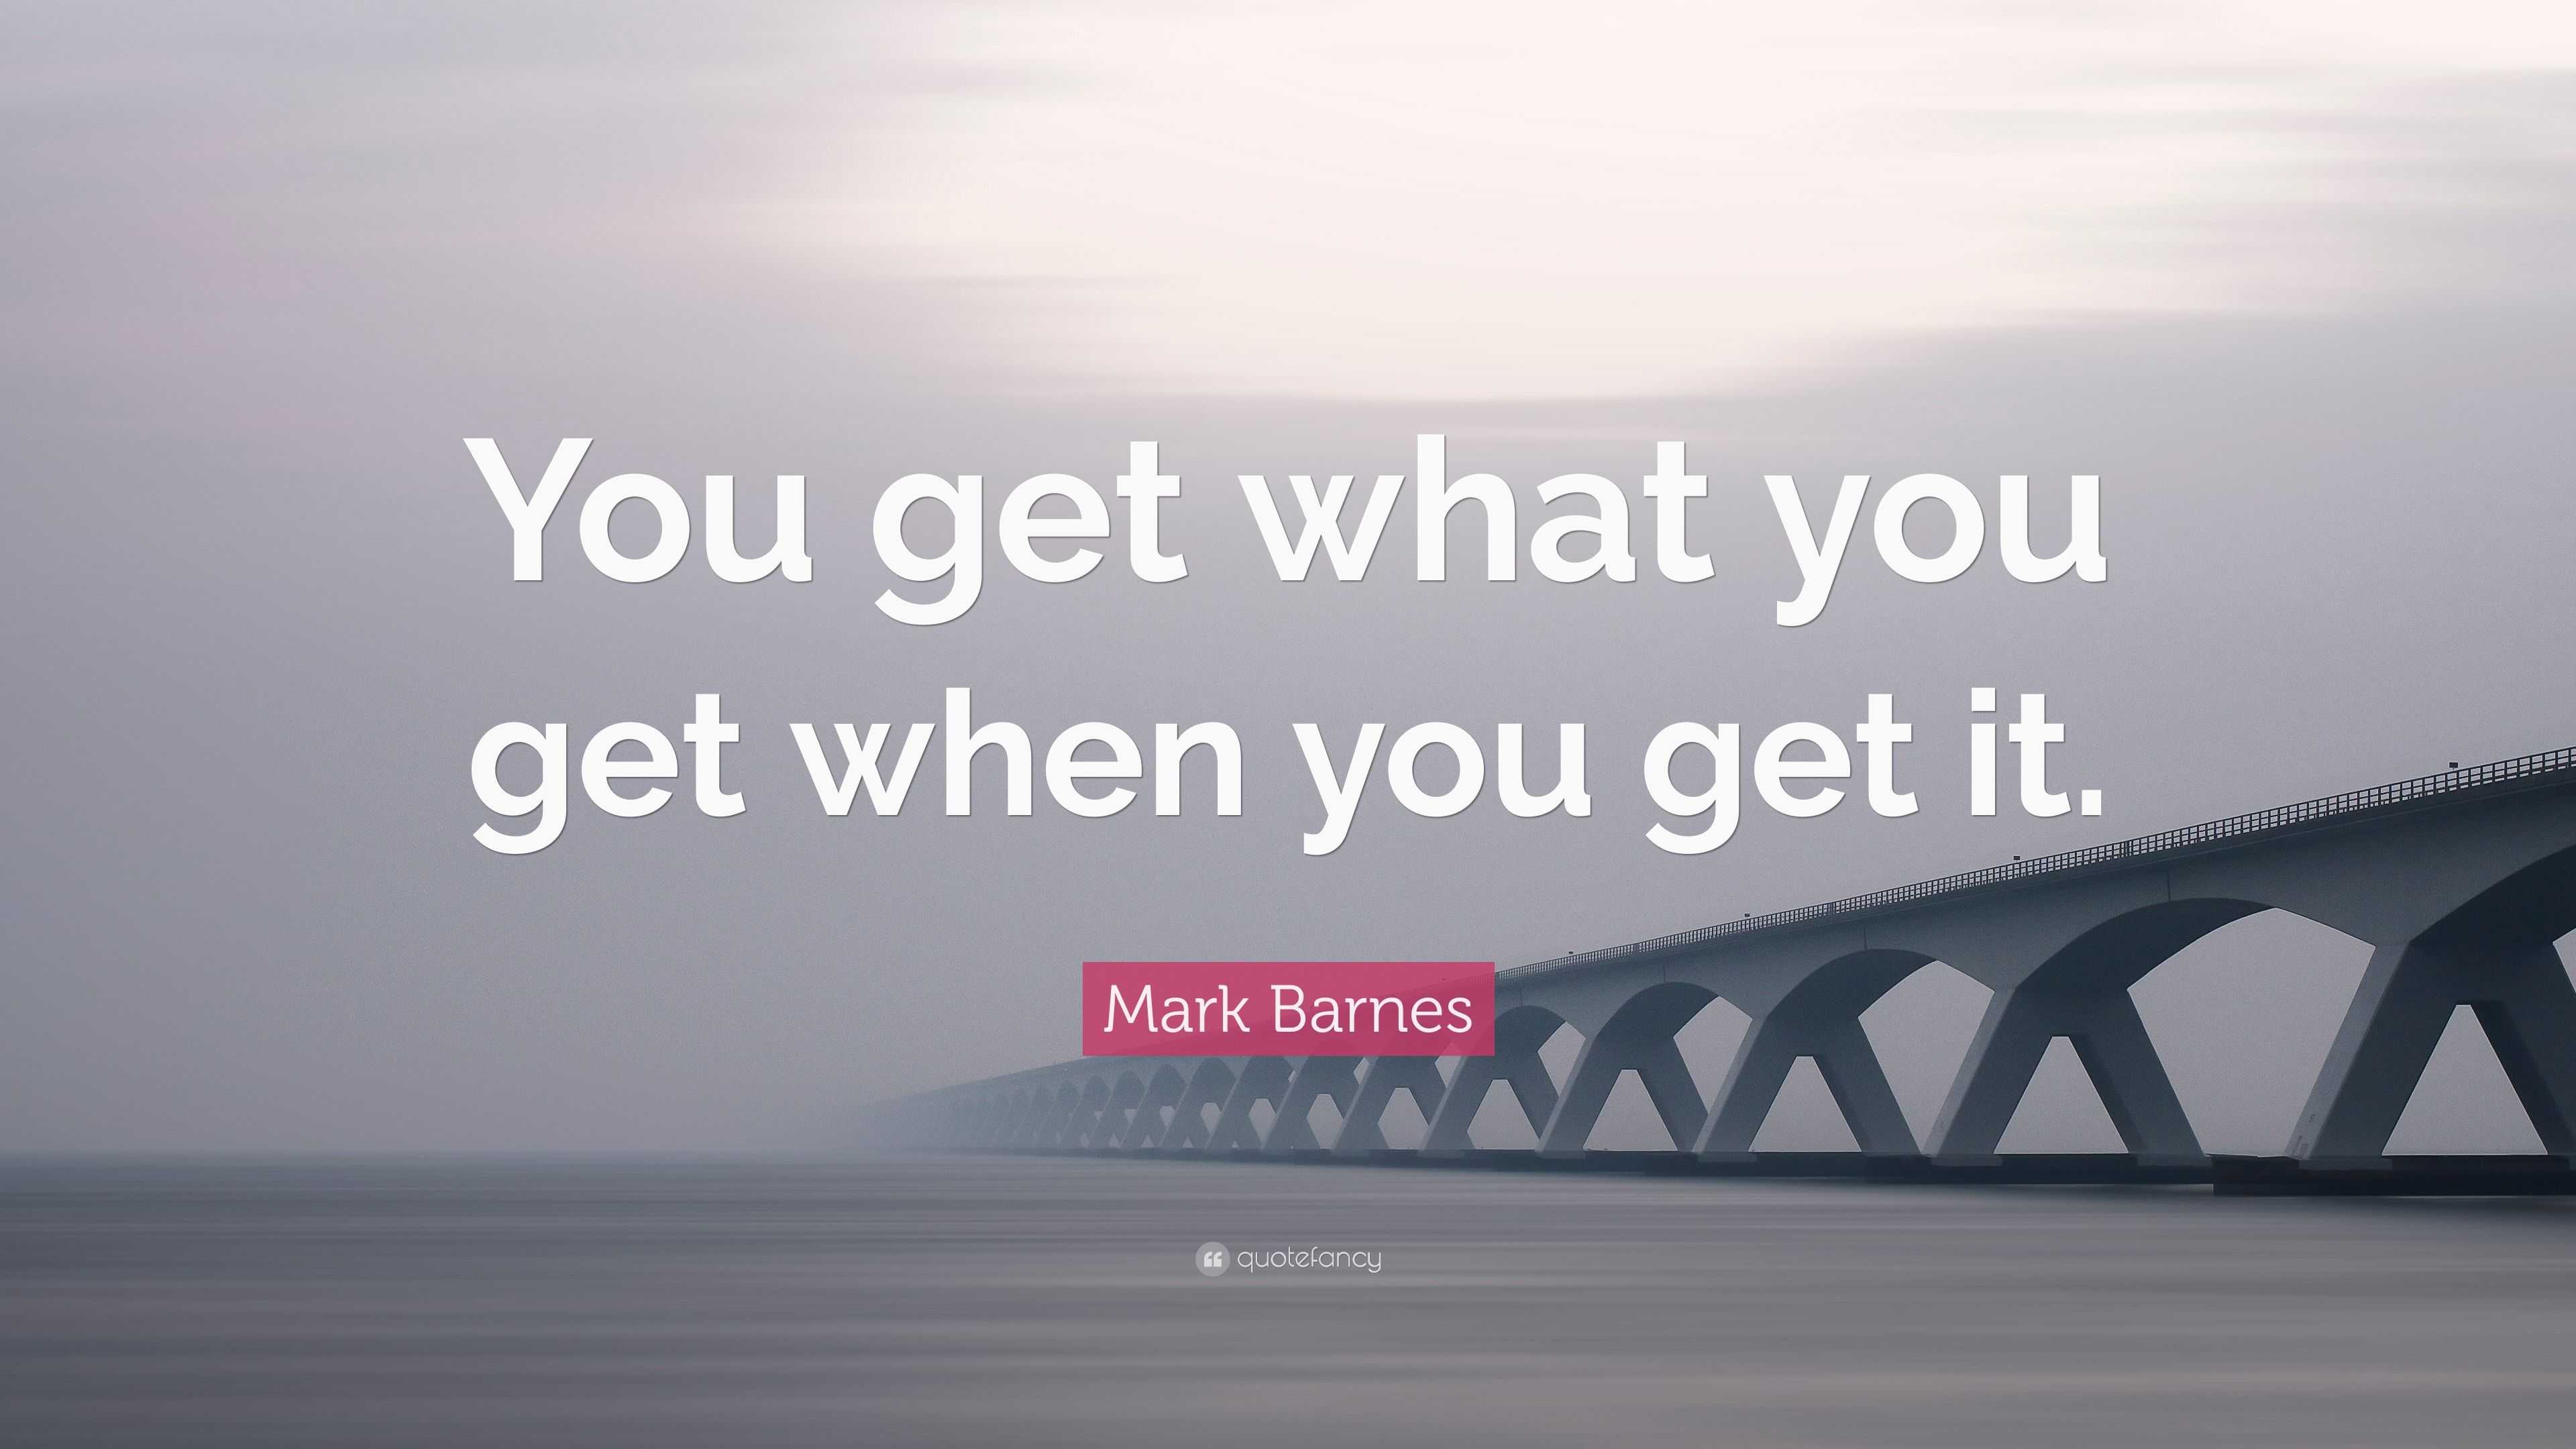 Mark Barnes Quote: “You get what you get when you get it.”